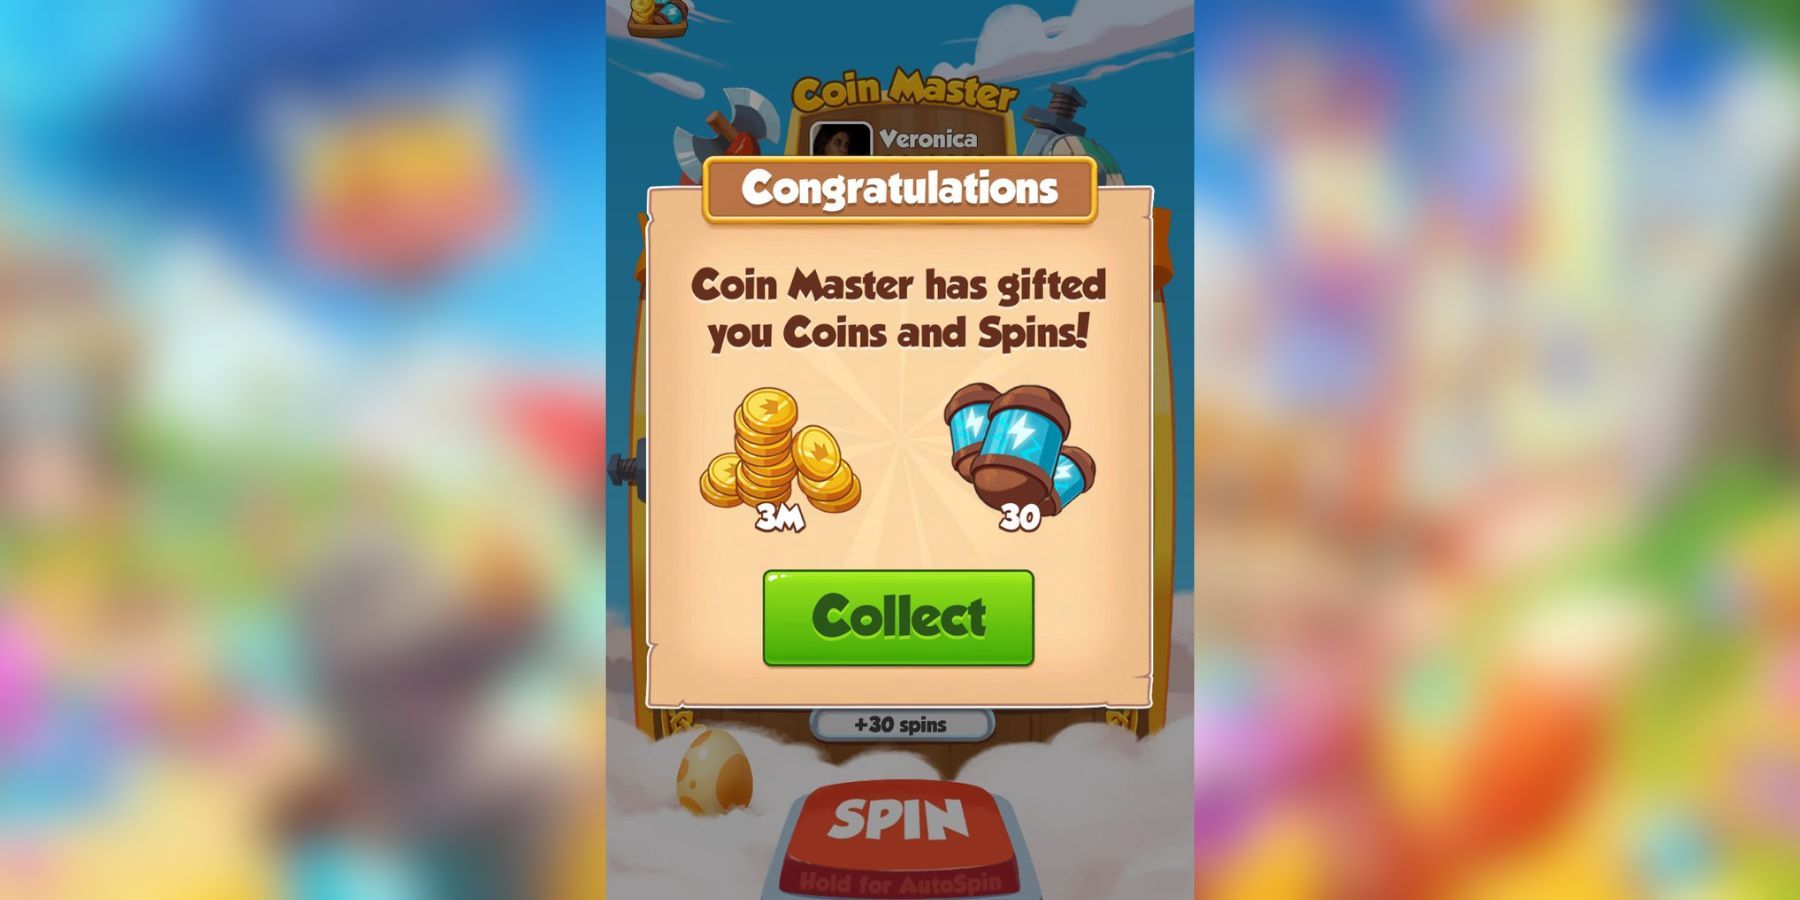 3M coins and 30 spins reward for Coin Master